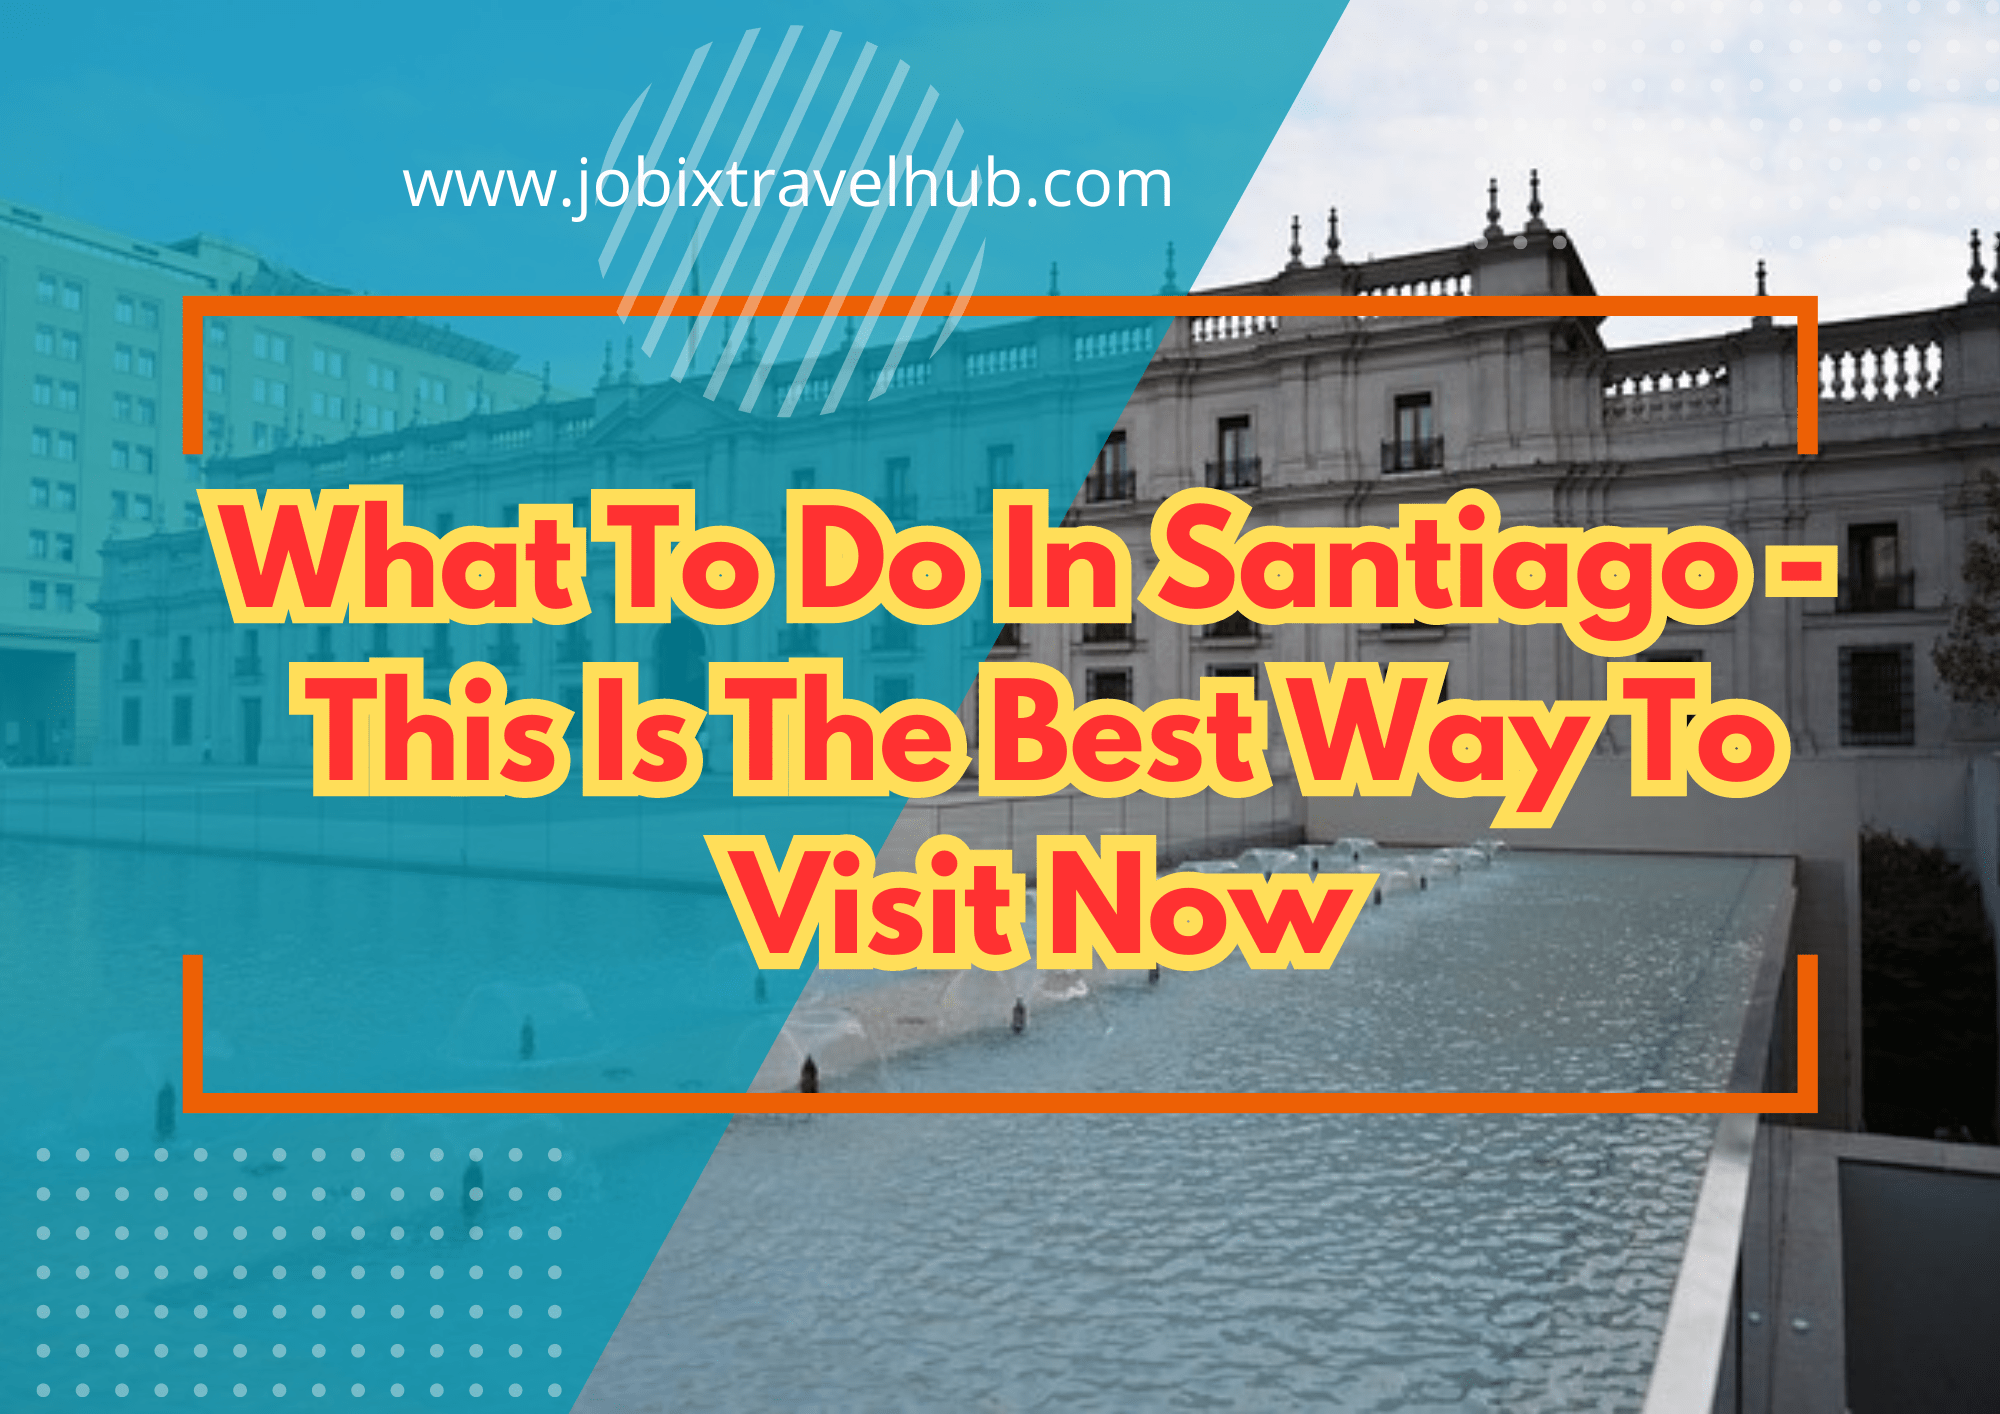 What To Do In Santiago - This Is The Best Way To Visit Now